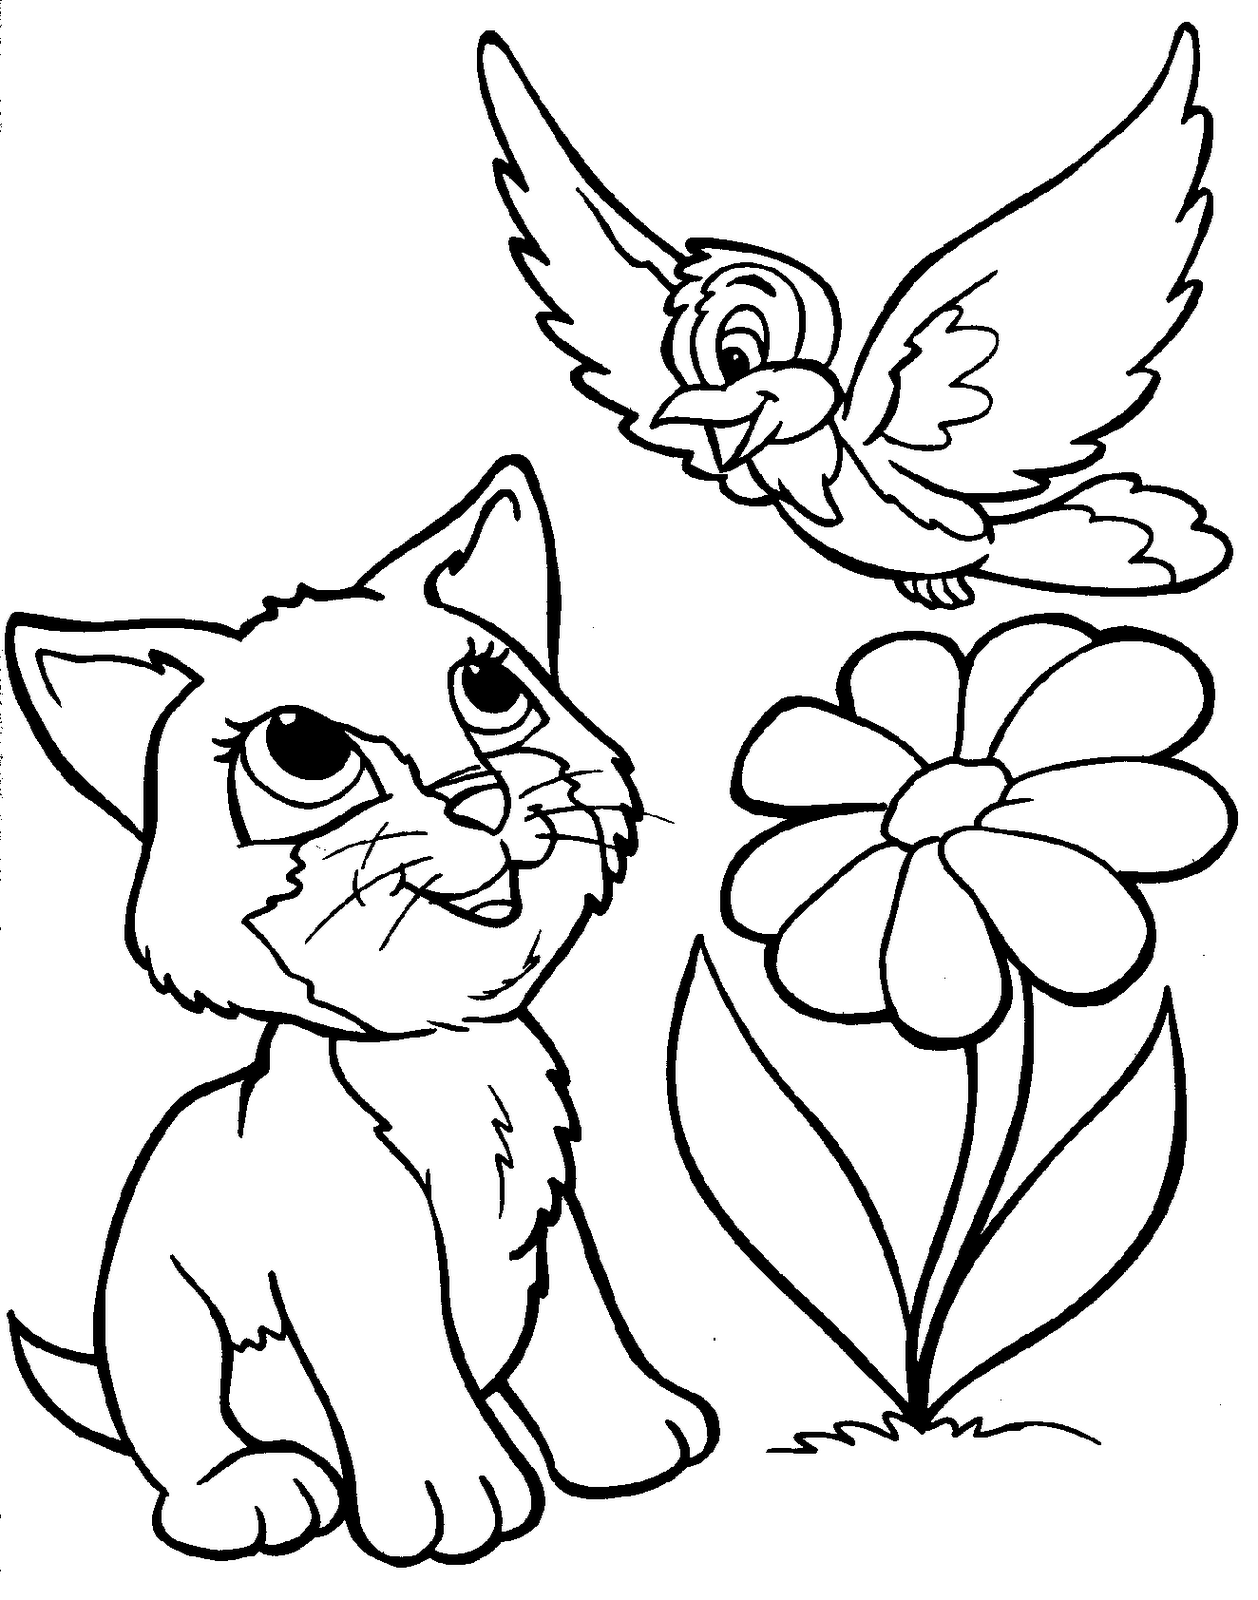 Coloring Pages Online animals cat coloring pages